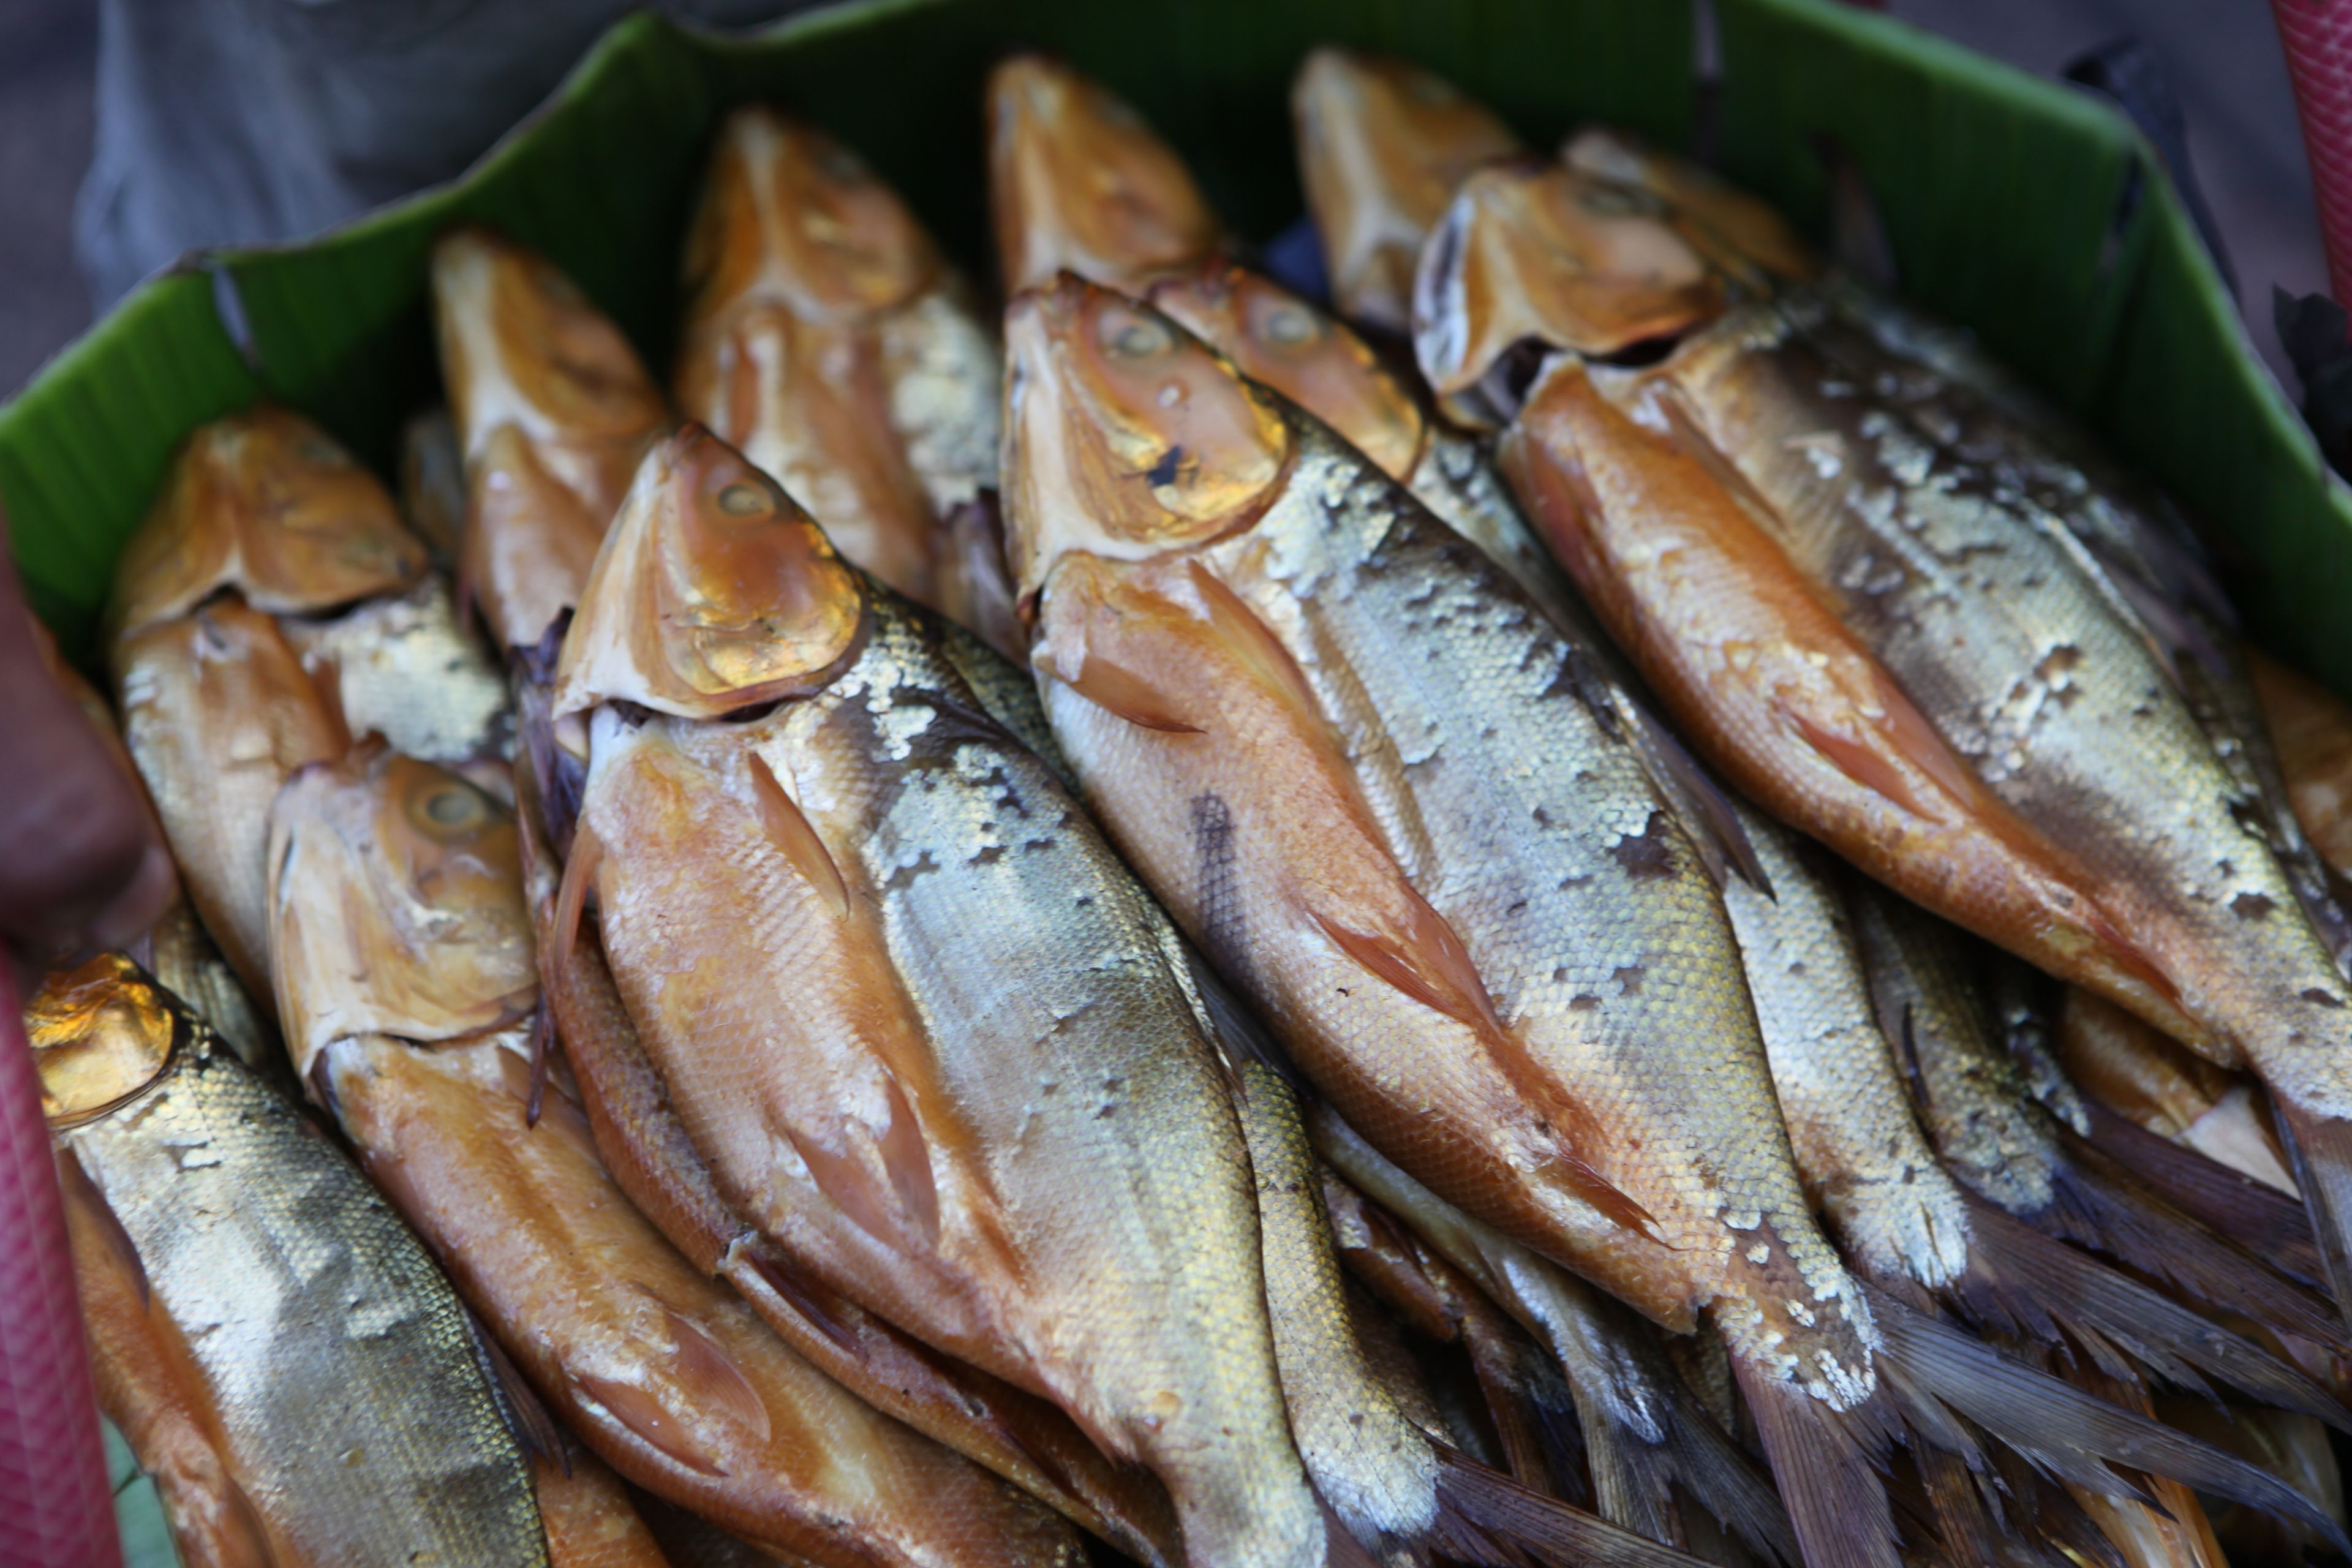 Fish from an outdoor market in the Philippines.